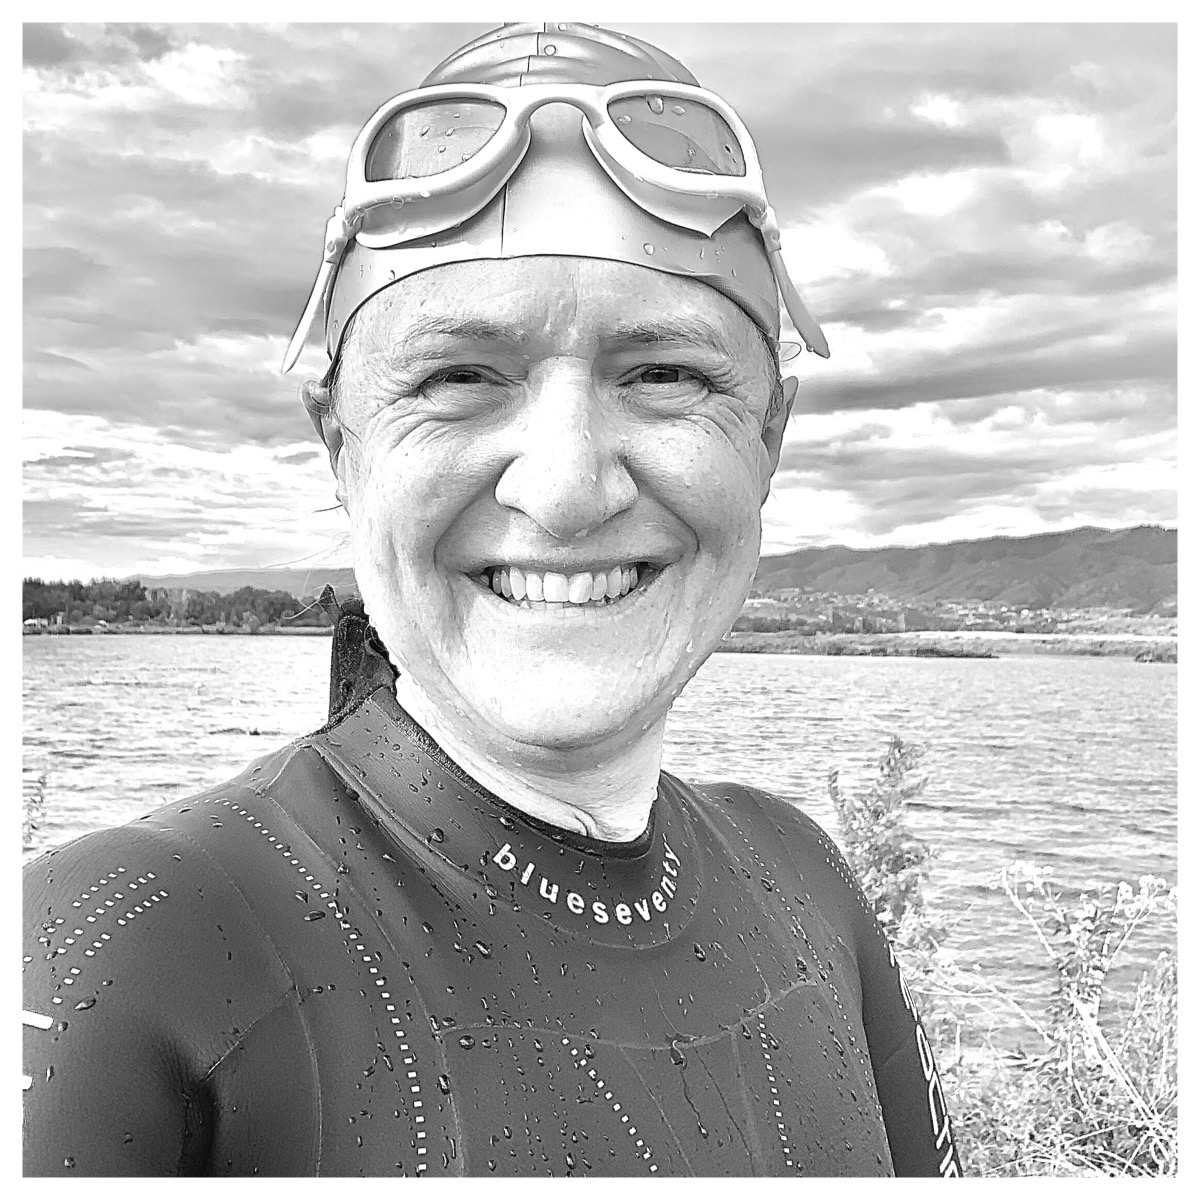 Black and white photo of the author in wetsuit, swimsuit and goggles standing next to a body of water, smiling.